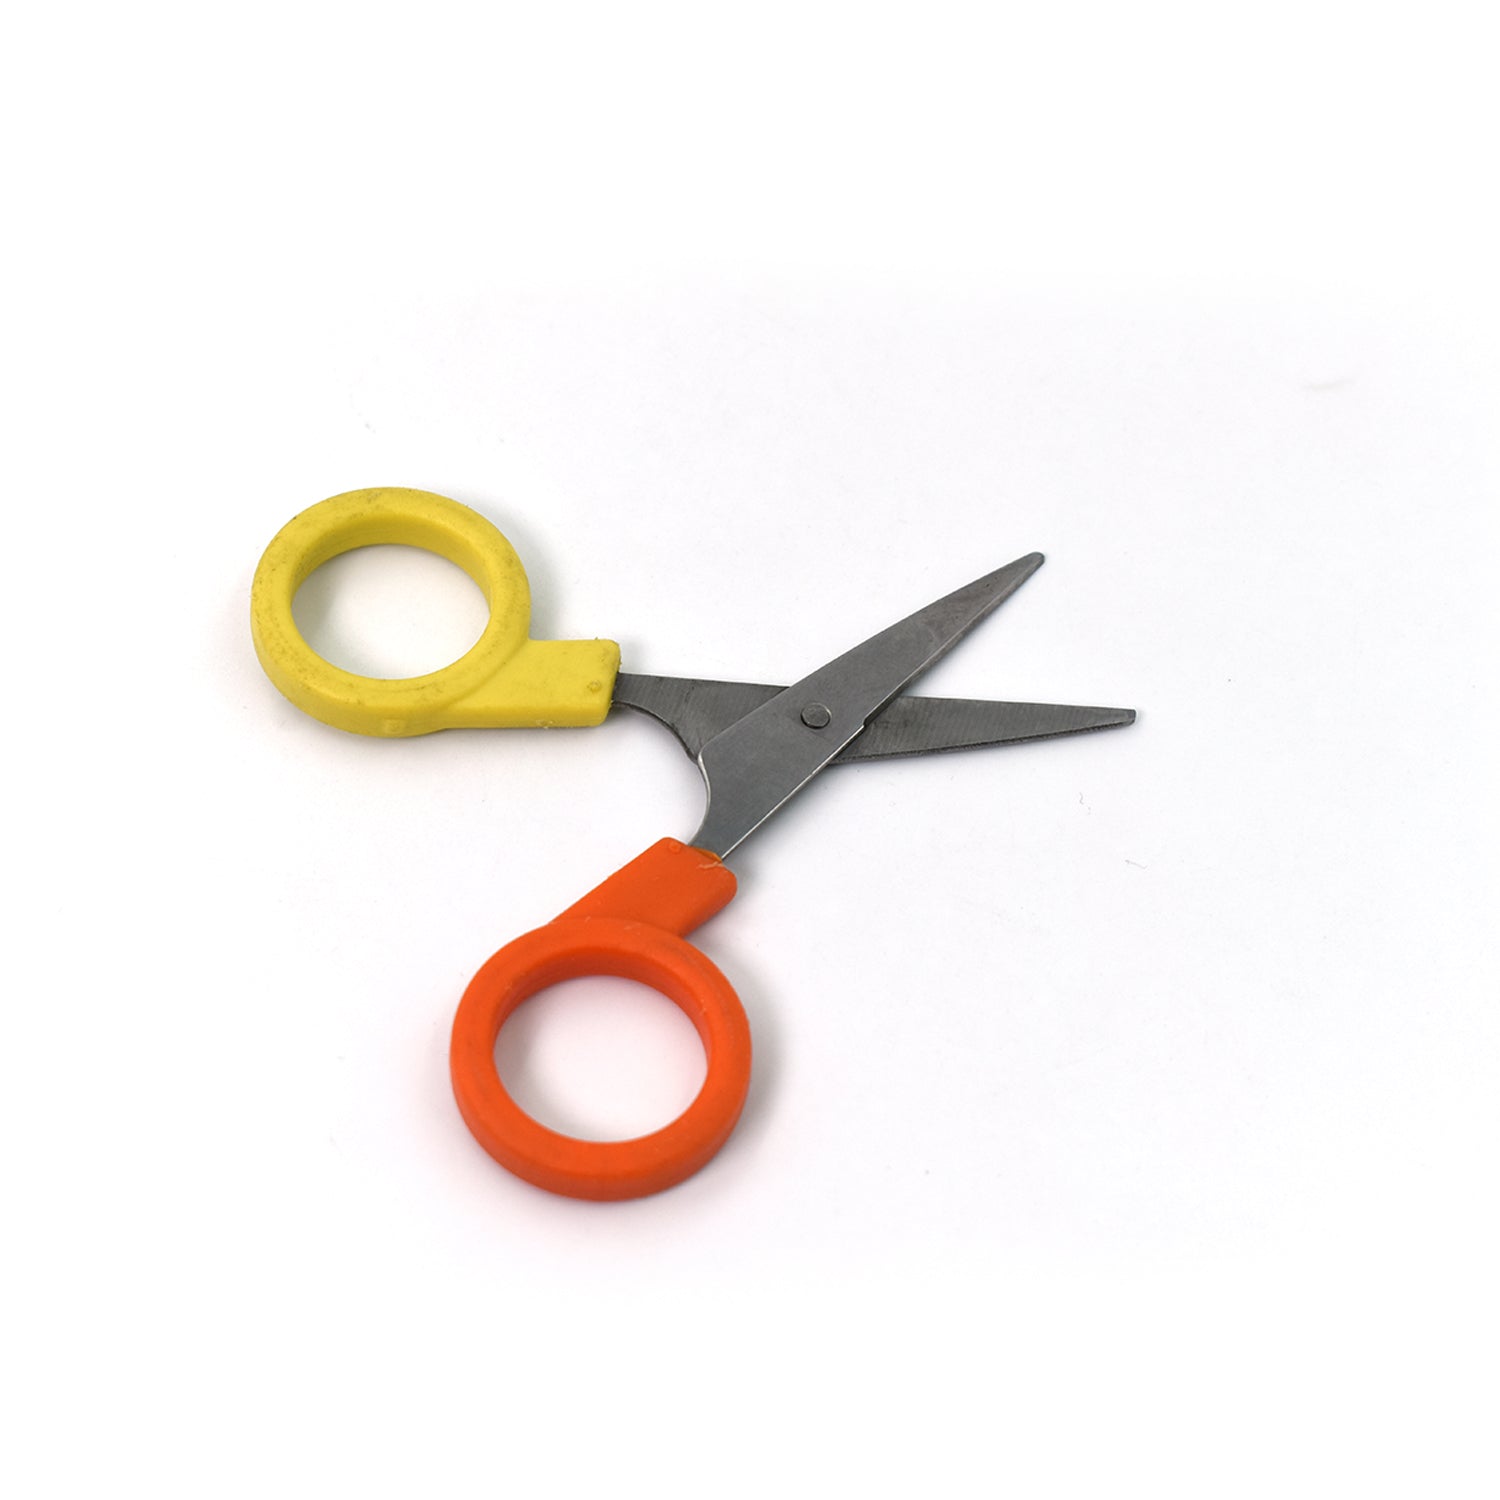 7623 cn Scissor For Cutting And Designing Purposes For Students And All Etc. DeoDap